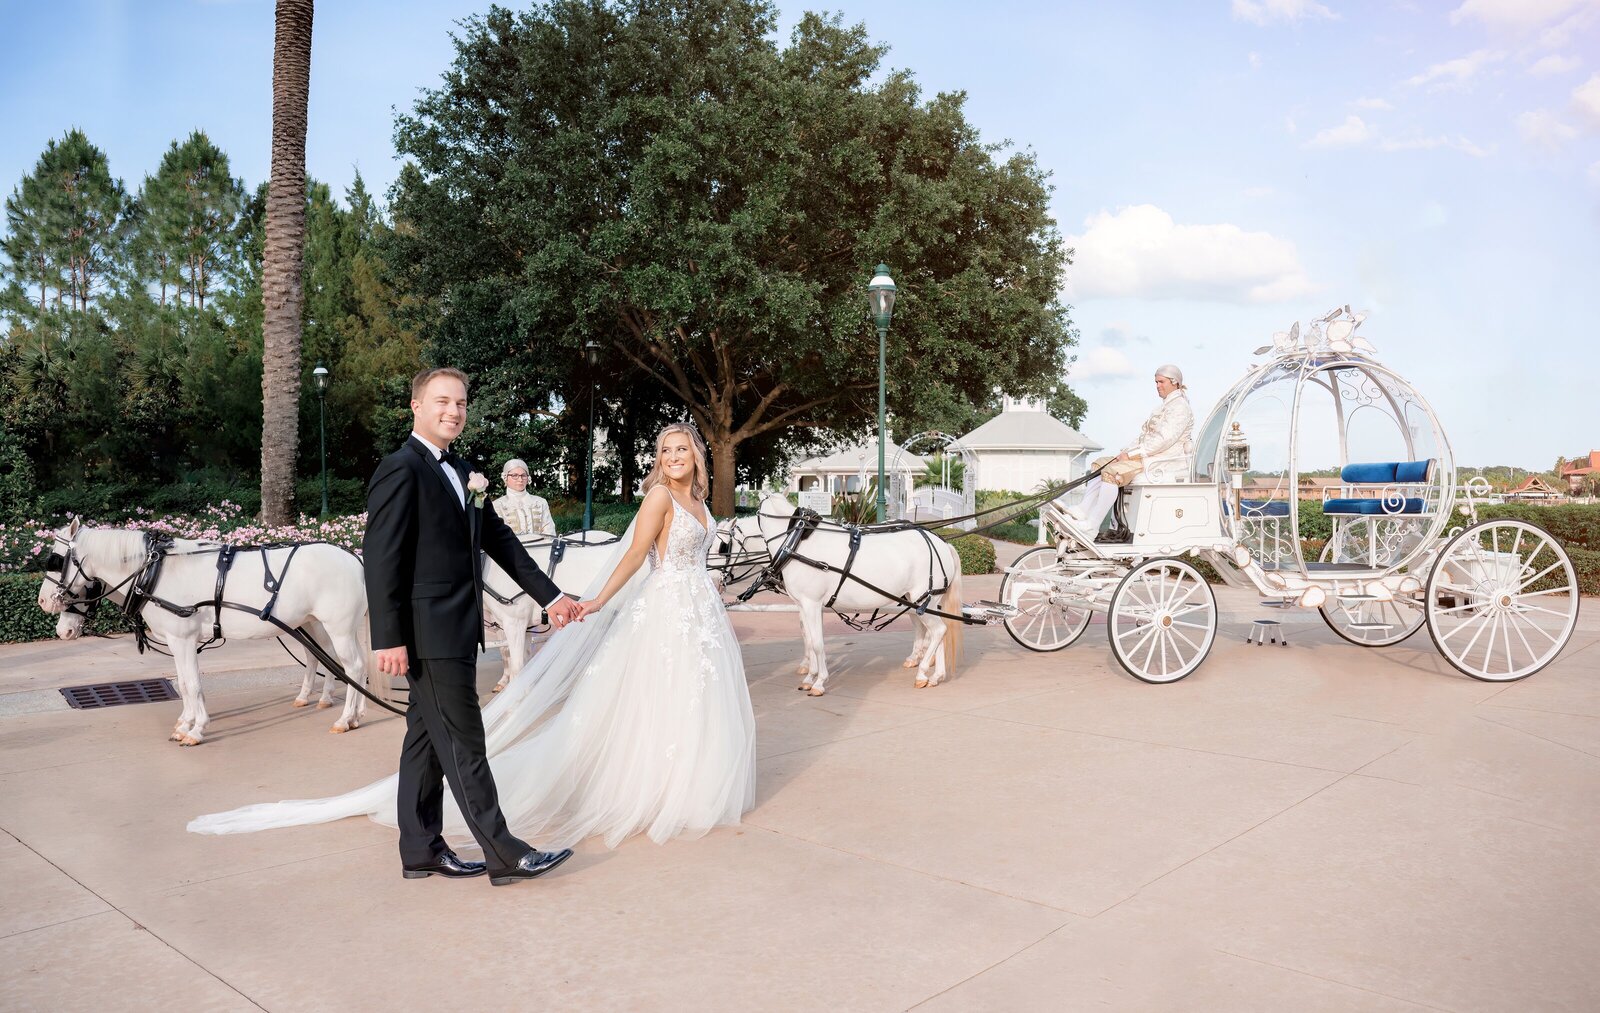 Turn your Disney dreams into reality with our expert wedding photography services. Whether you're saying 'I do' in front of Cinderella's Castle or exploring Epcot's international charm, we'll ensure your memories are as magical as the park itself.